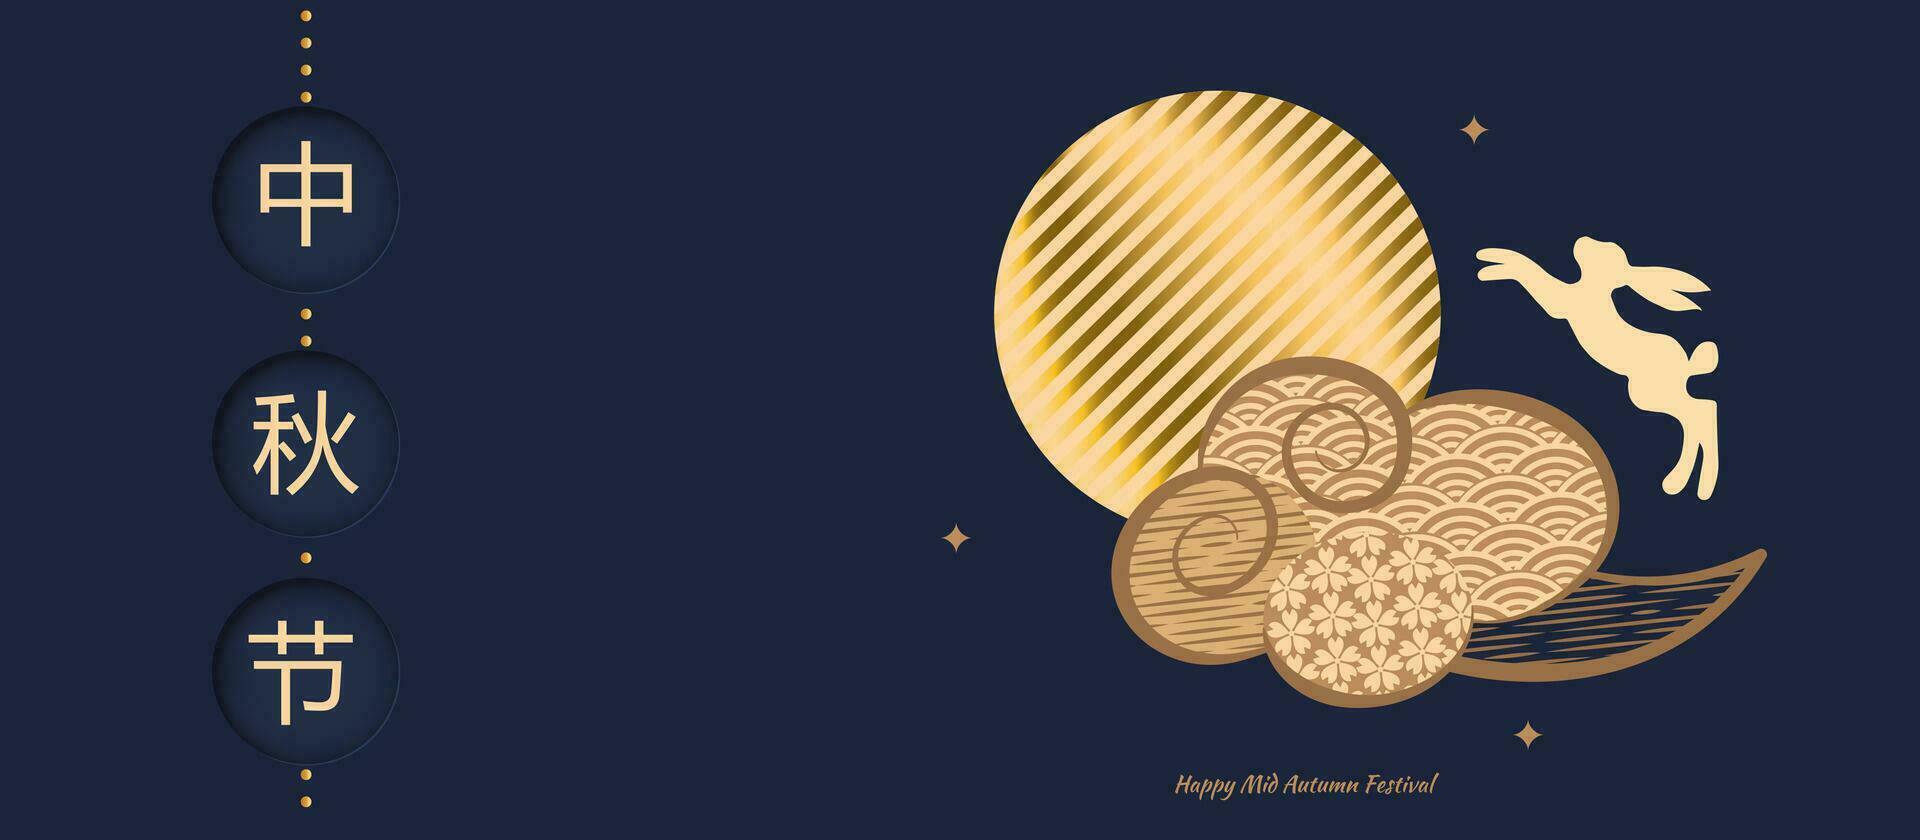 Banner design with traditional Chinese full moon circles, jumping hares under the moon. Stylized cloud. Translation from Chinese - Mid-Autumn Festival. Vector illustration